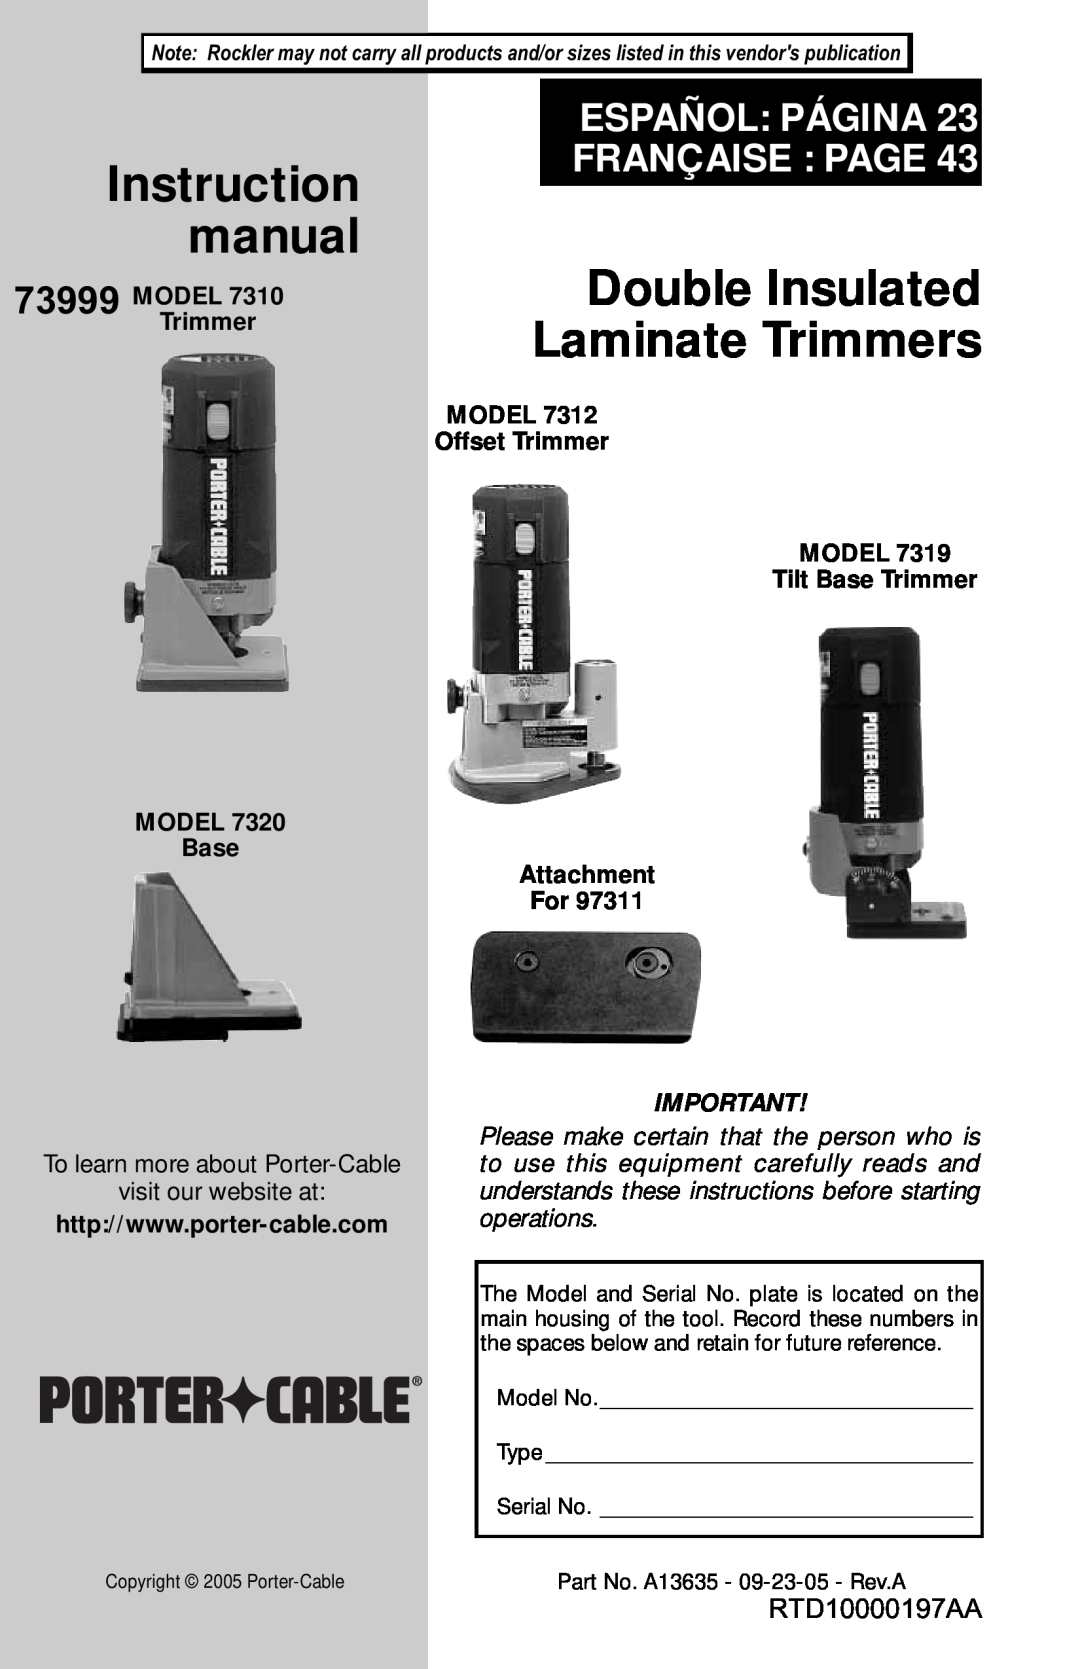 Porter-Cable 7320, 7310, 7319, 7312 instruction manual Instruction manual, Double Insulated, Laminate Trimmers, 73999 